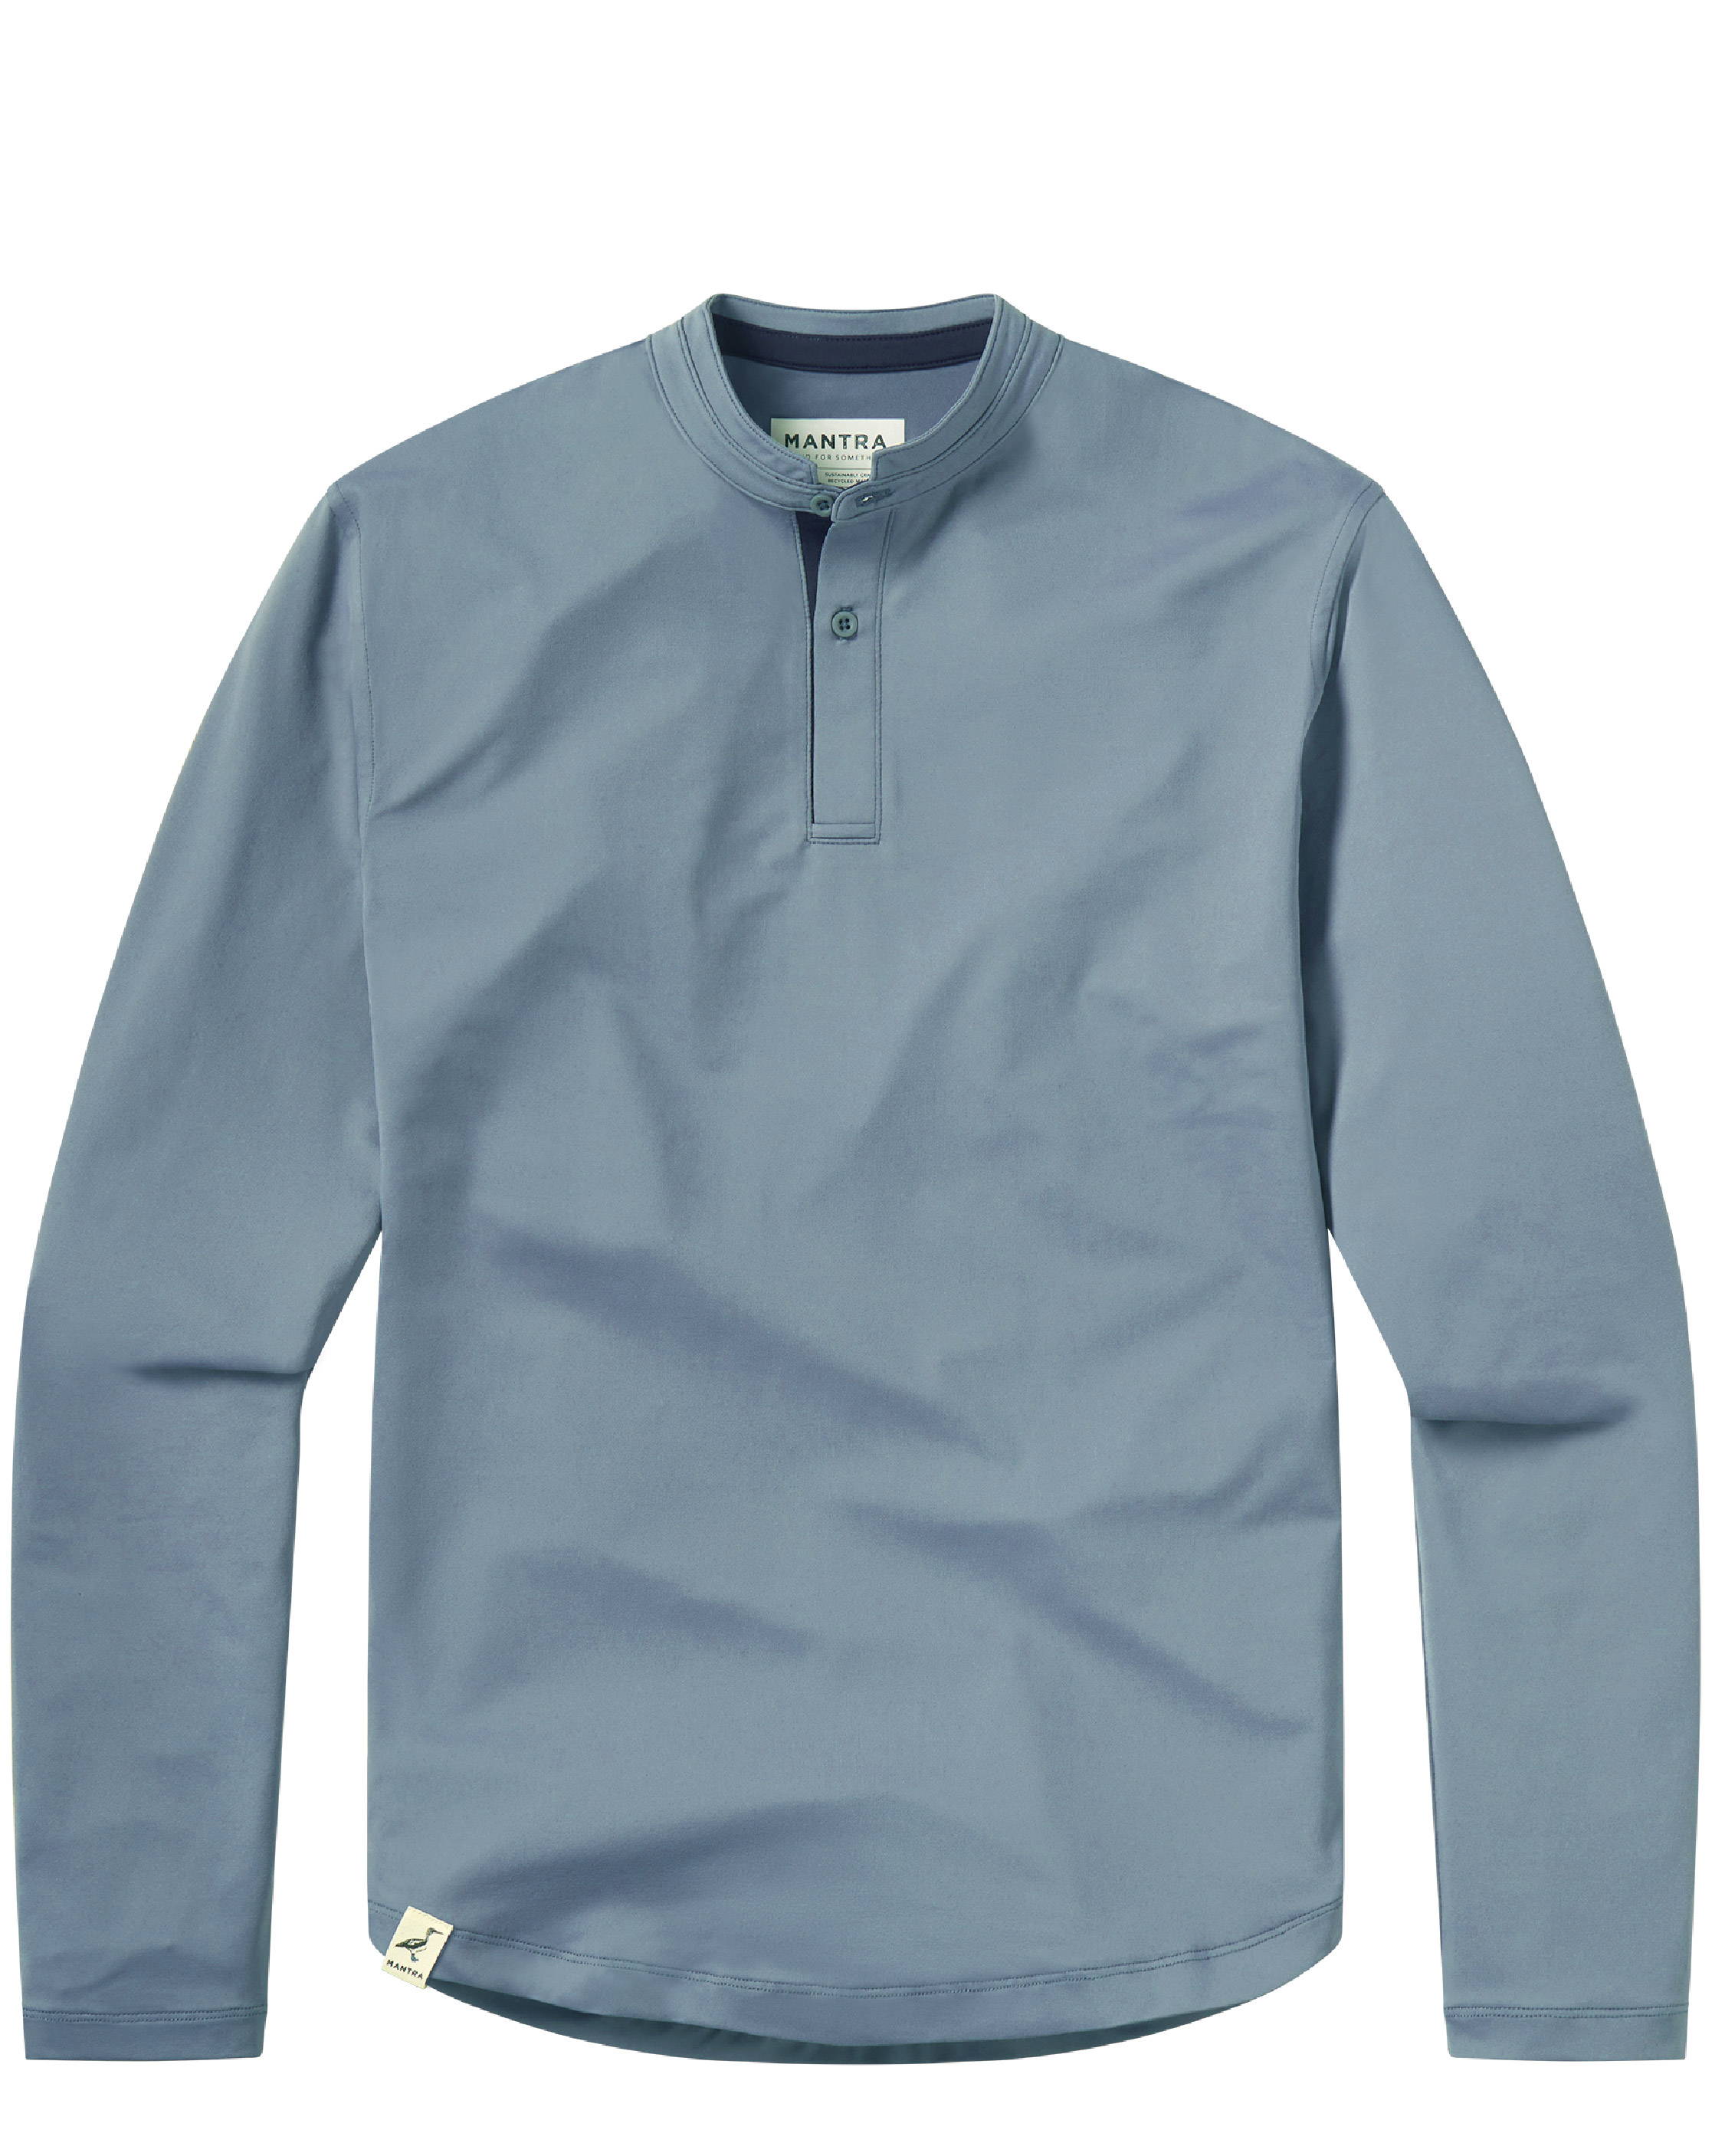 MANTRA SKY POND L/S Polo - sustainable mens performance polo made from recycled materials